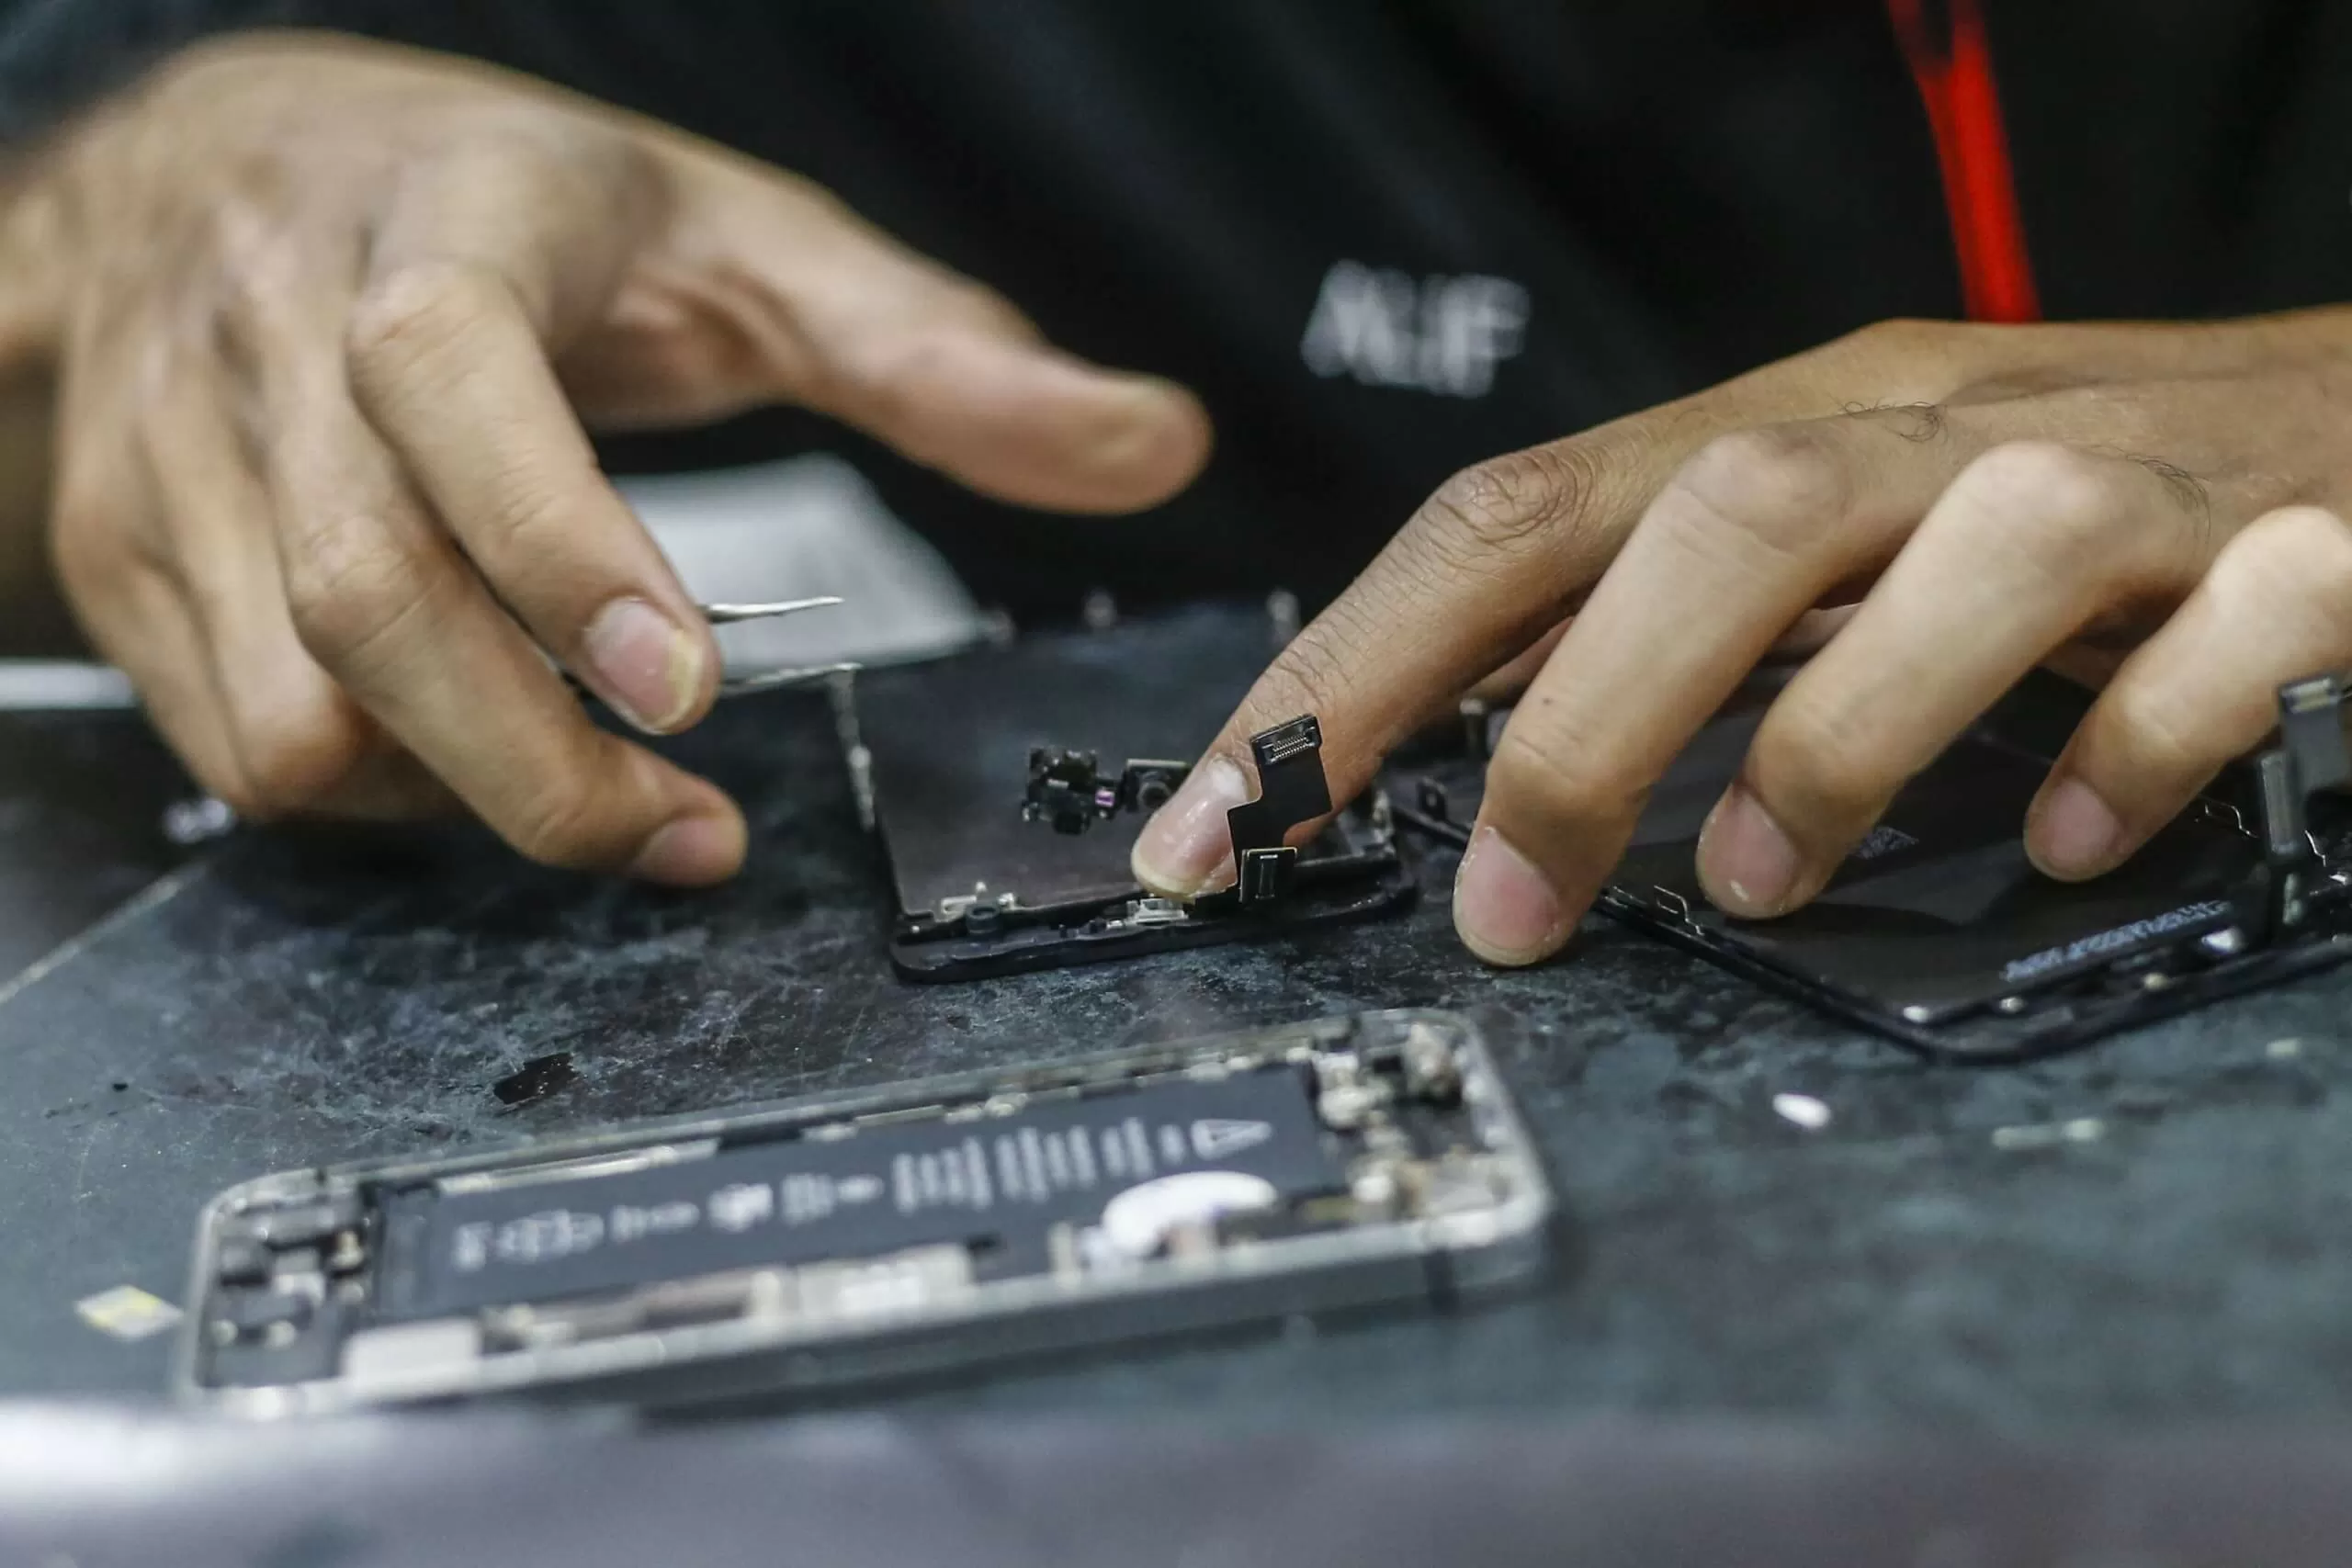 Apple has quietly launched an in-home repair program for iPhones